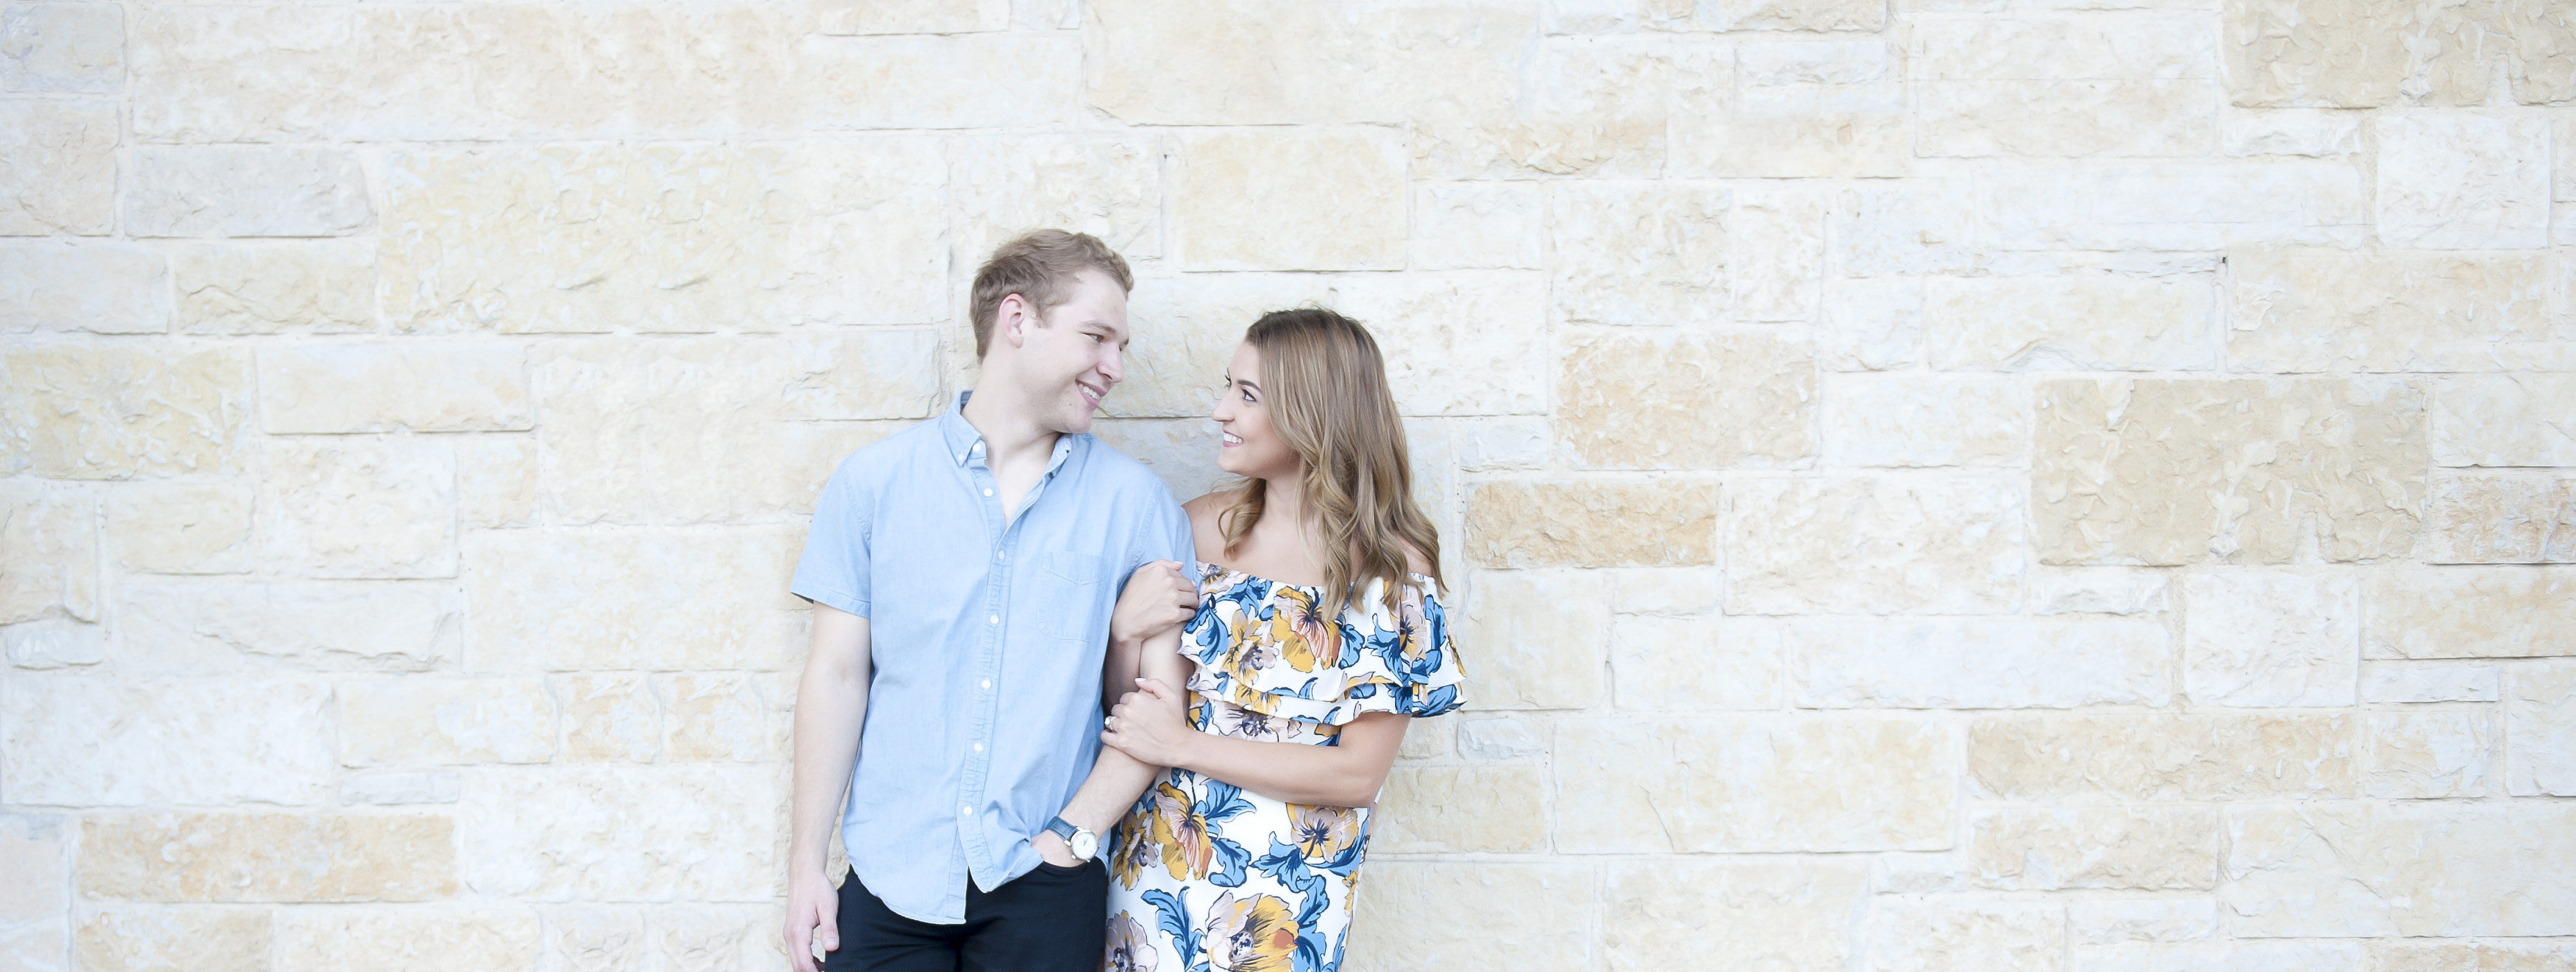 Couple Leaning on Austin Stone Wall